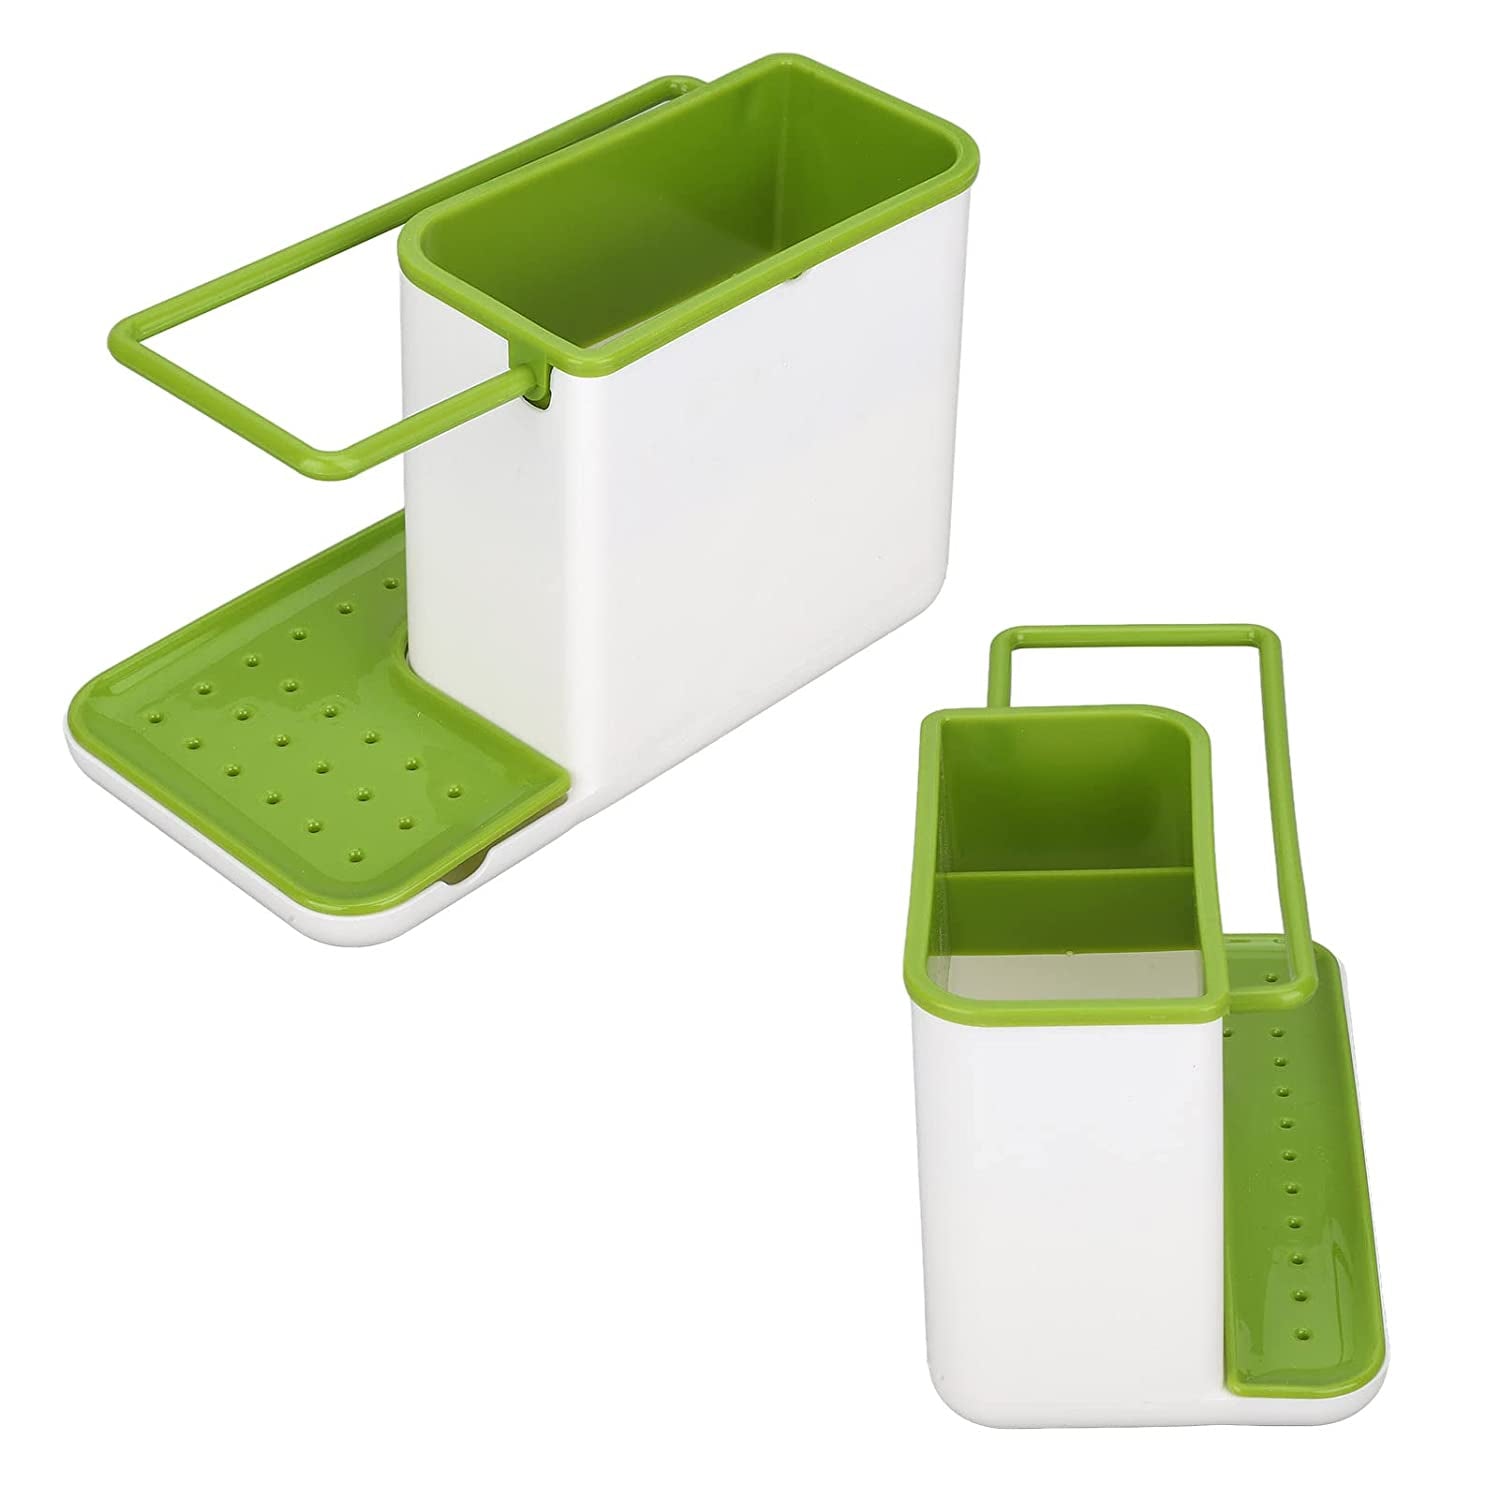 2155A Plastic 3-in-1 Stand for Kitchen Sink Organizer Dispenser for Dishwasher Liquid Dukandaily